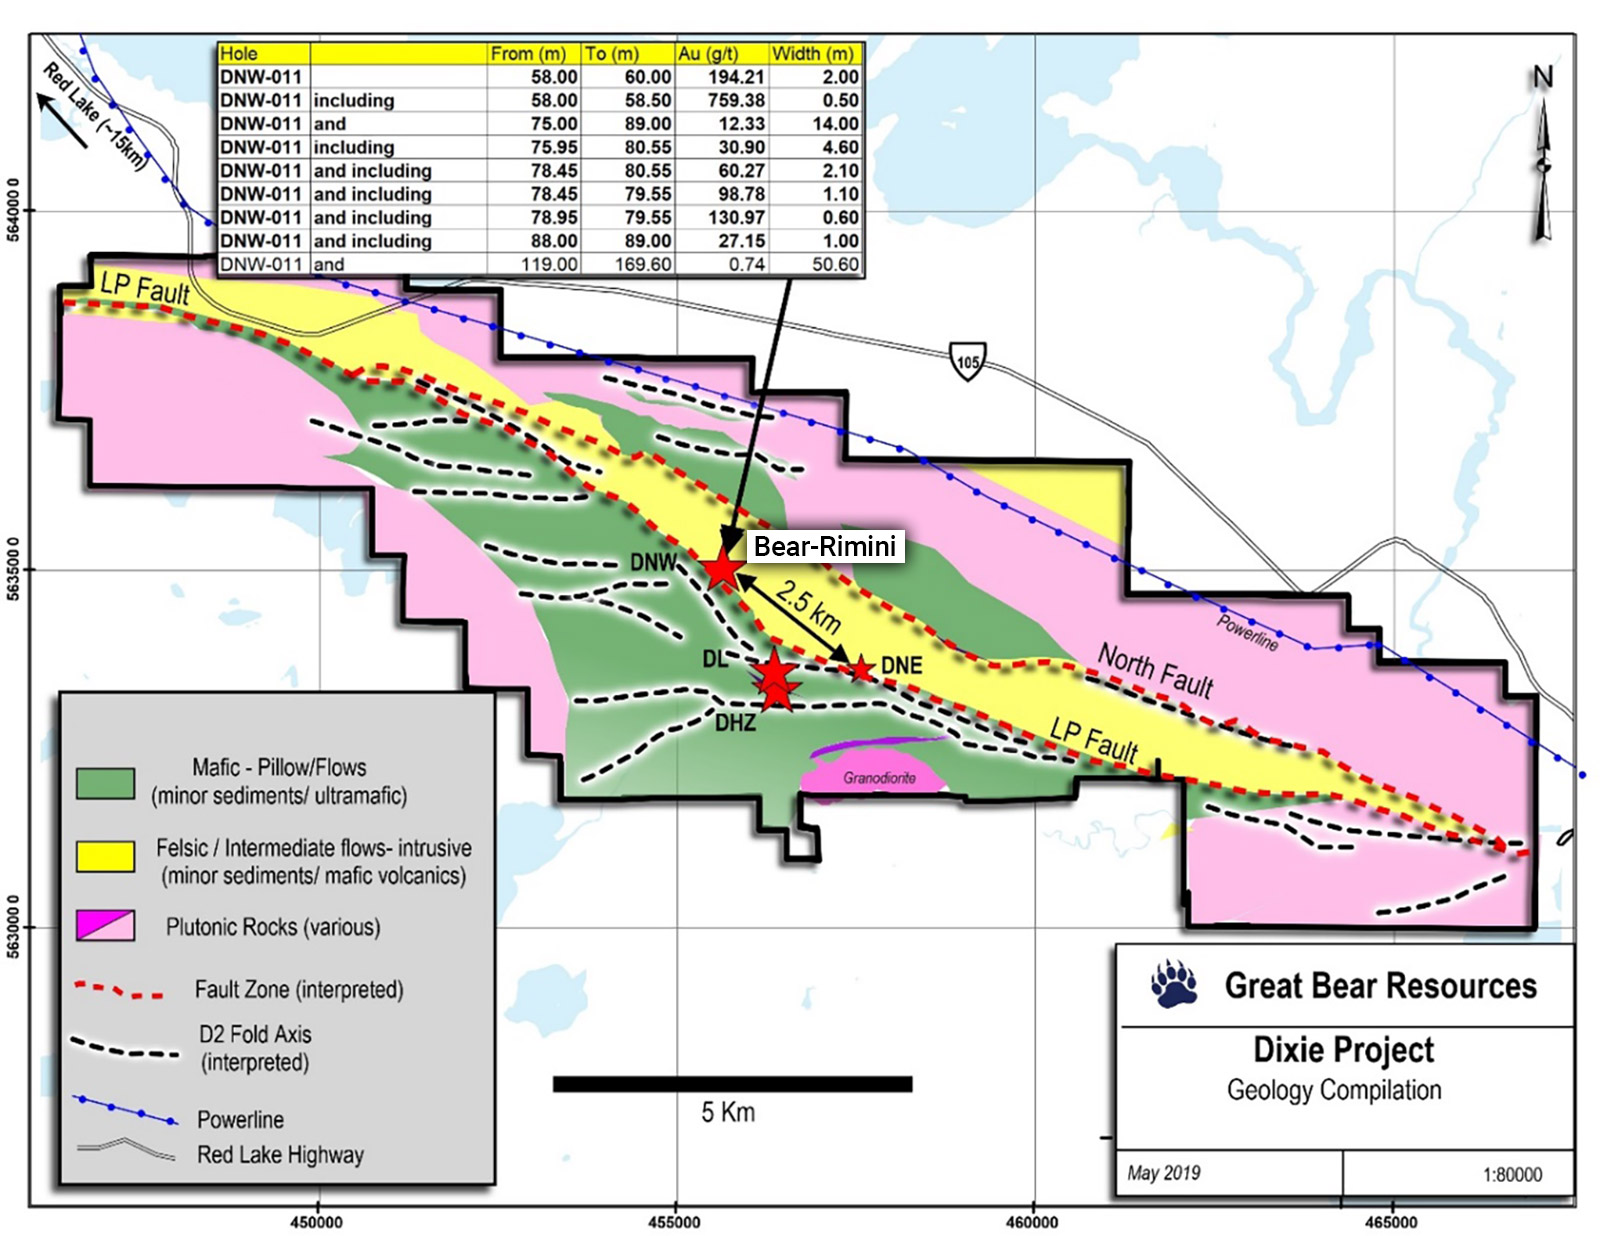 Map of the Dixie project showing the location of known gold zones (DHZ, DL, DNW and DNE) and current drill results. The location of the LP Fault drilled in DNW-011 is shown in red dashes.